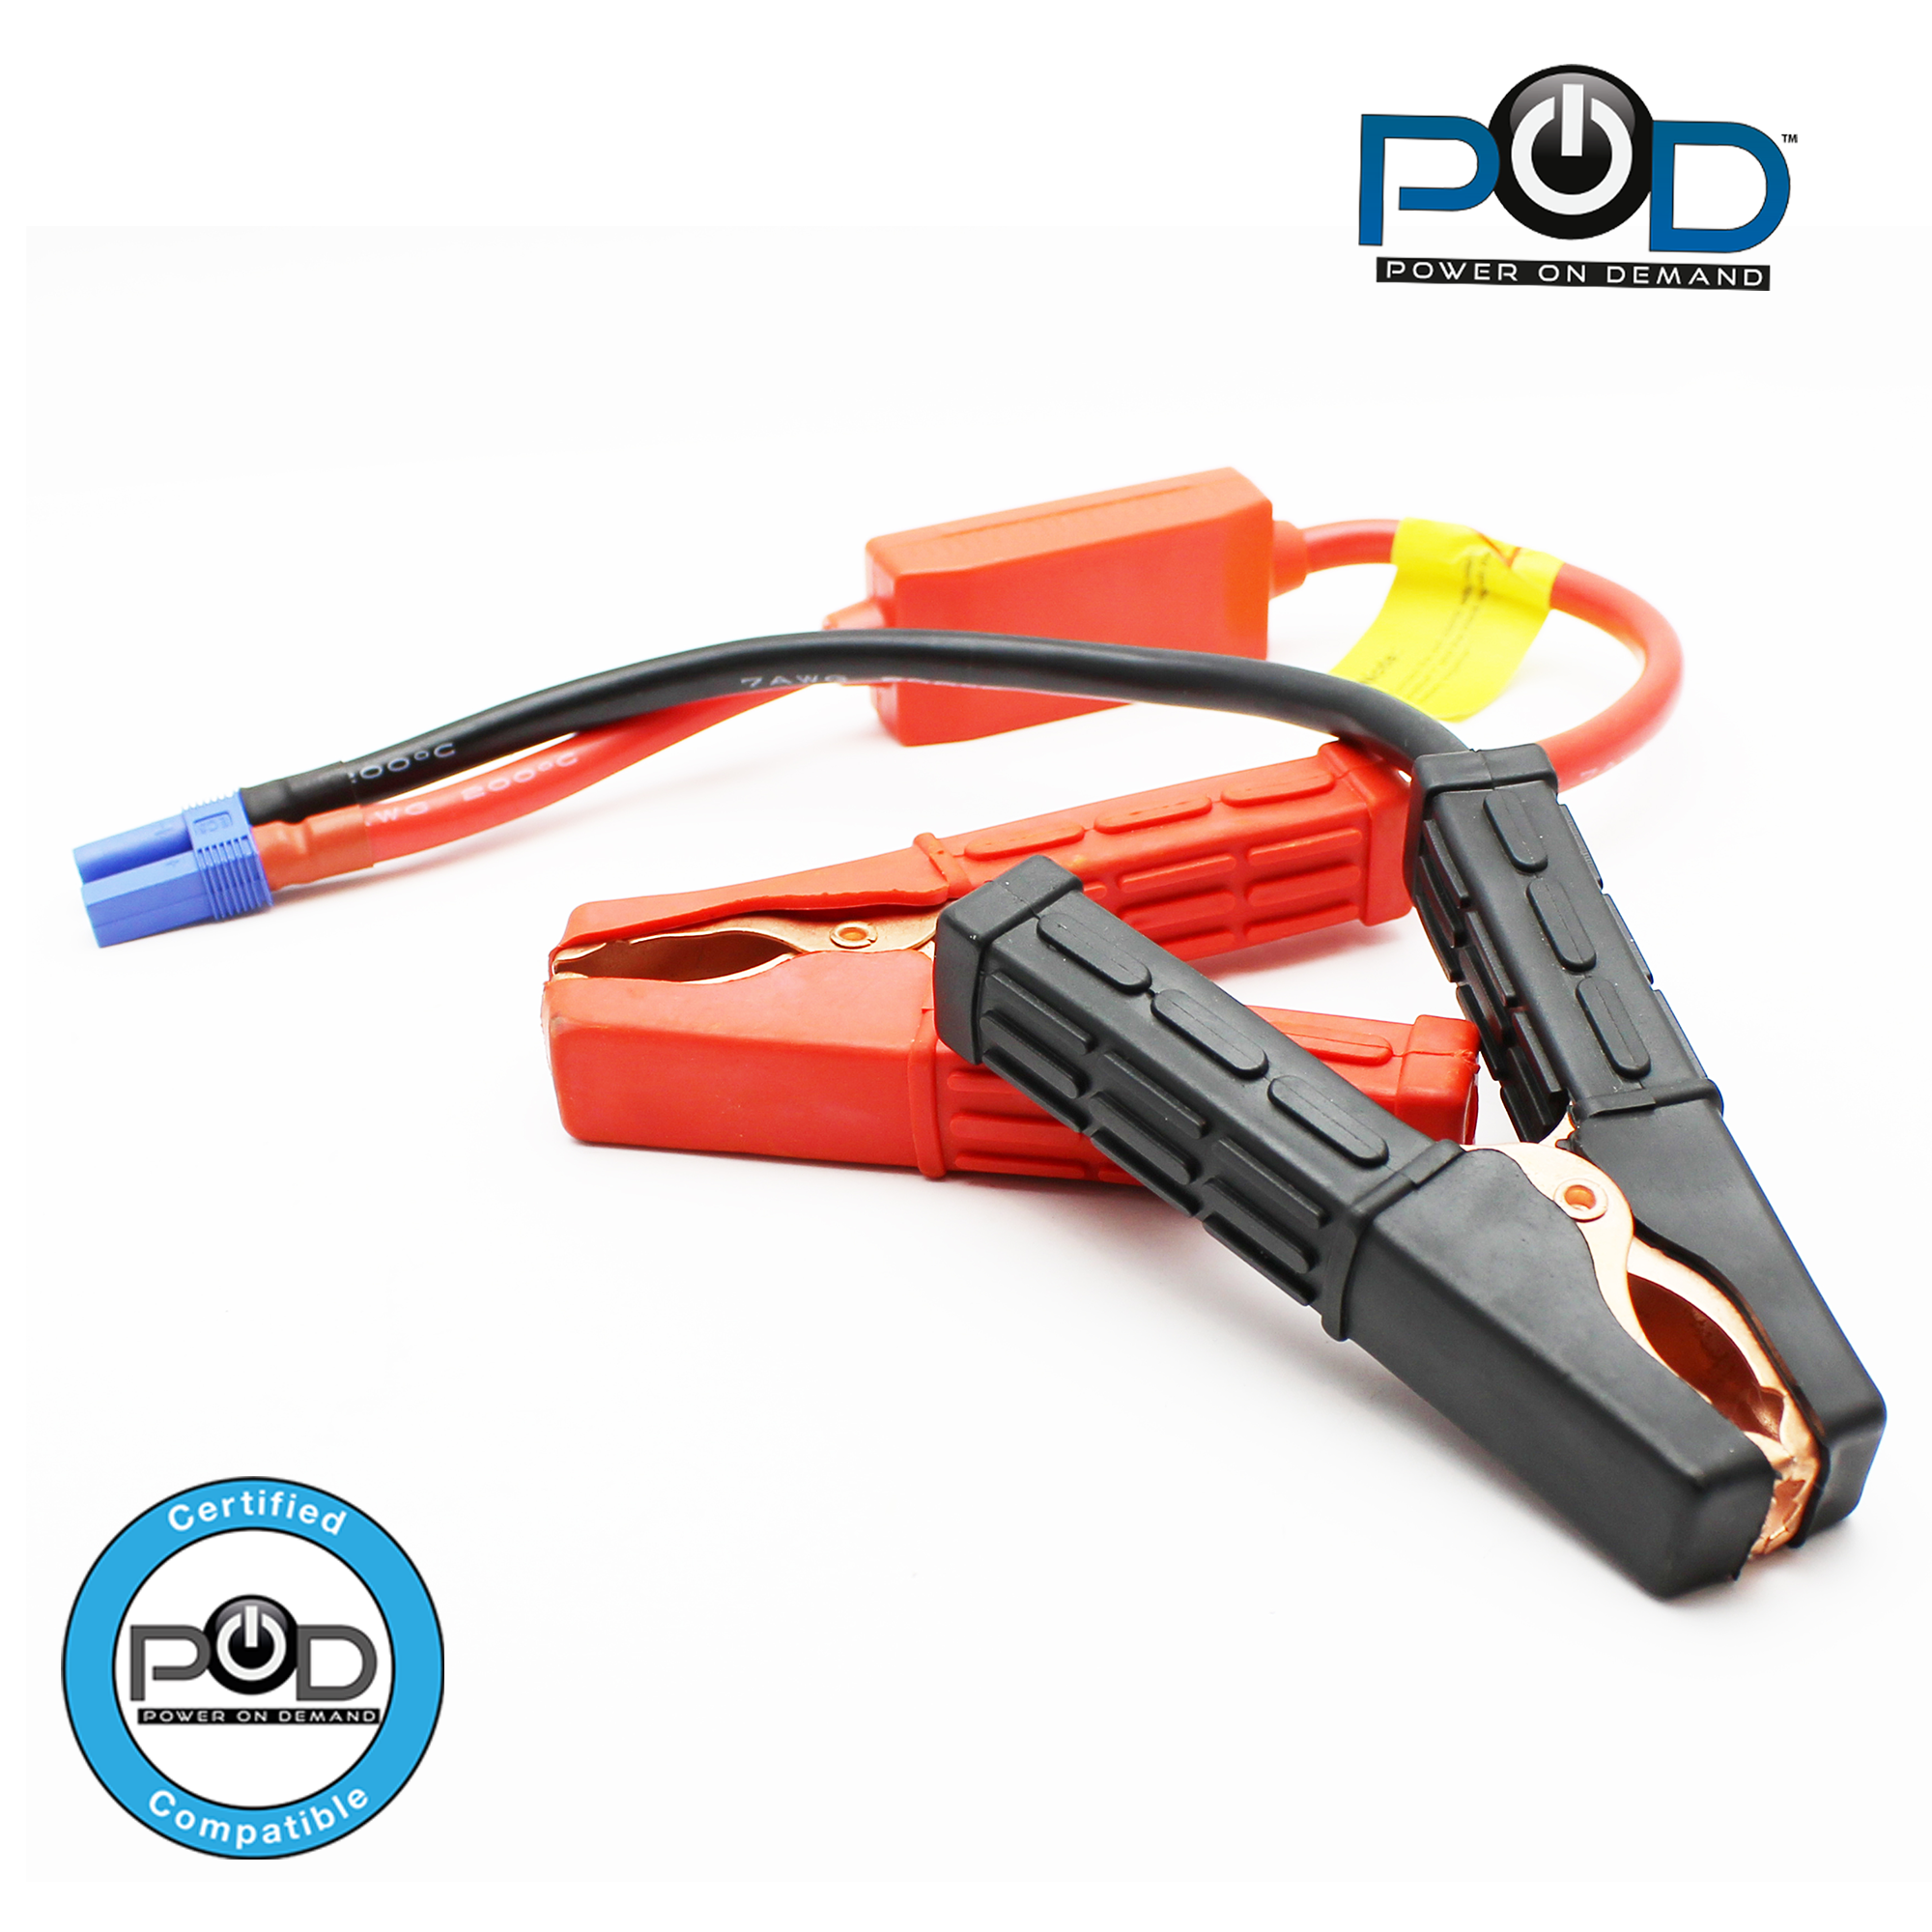 POD Jumper Cables  |  Select from Premium-Pro, Intelligent & Standard Features